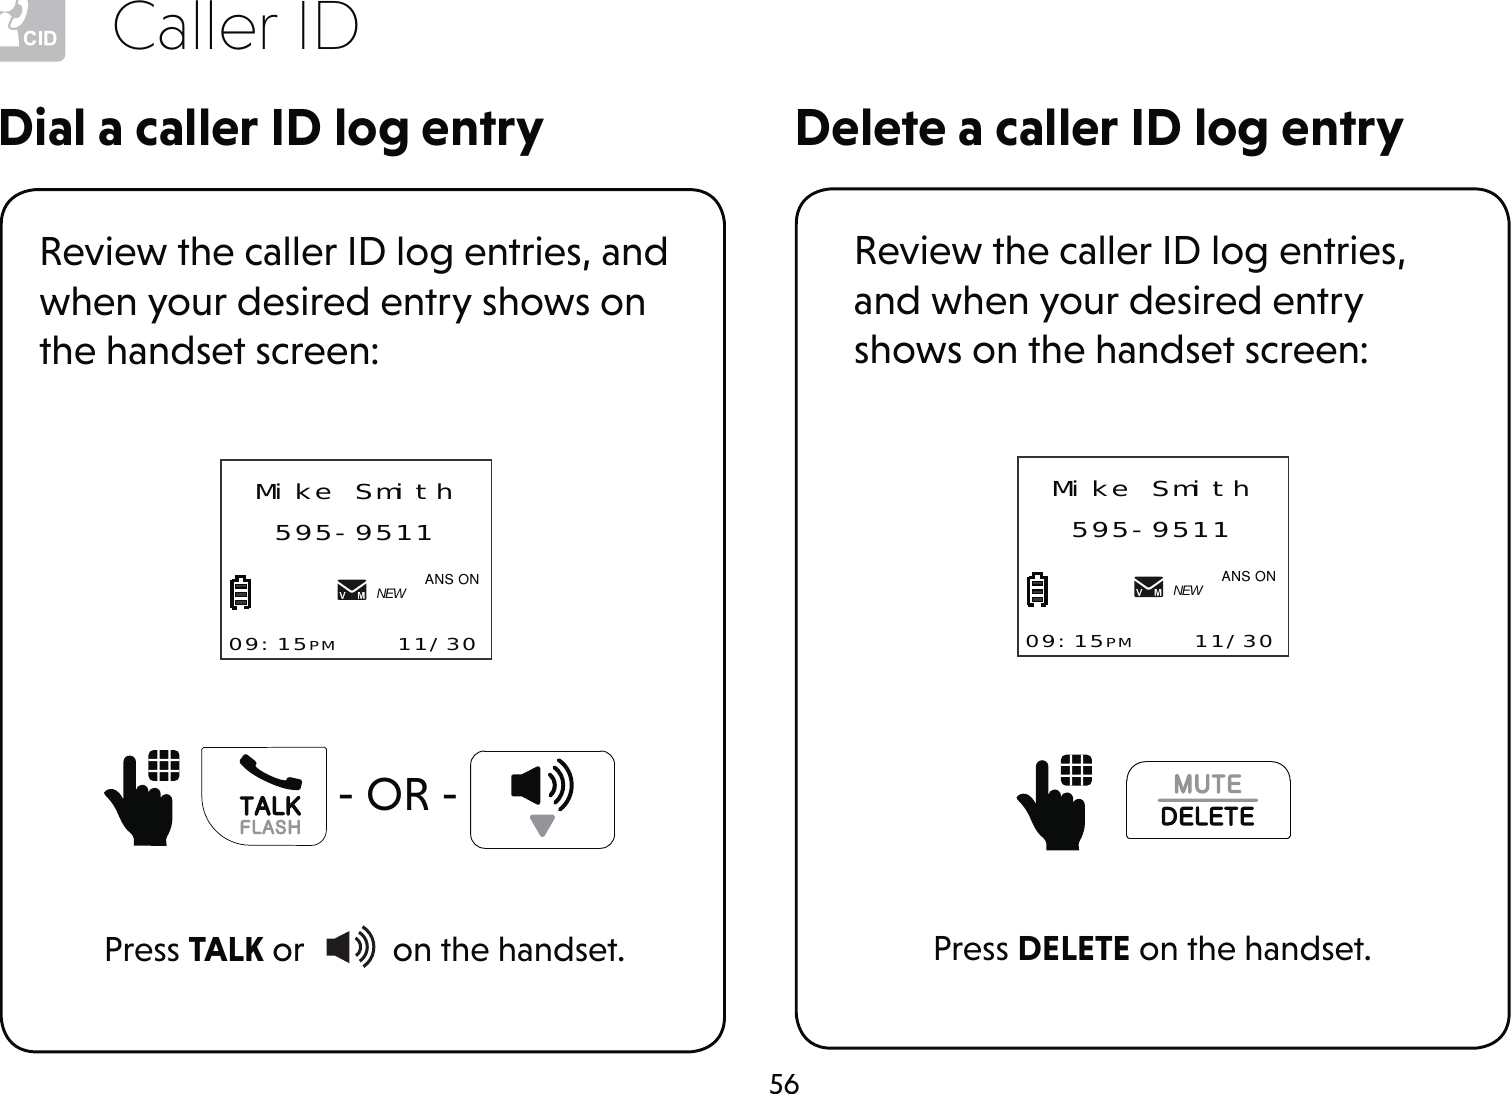 56Caller IDDelete a caller ID log entryDial a caller ID log entryReview the caller ID log entries, and when your desired entry shows on the handset screen:Press TALK or   on the handset.   - OR - Mike Smith595-951109:15PM    11/30NEW$1621Review the caller ID log entries, and when your desired entry shows on the handset screen:Press DELETE on the handset.Mike Smith595-951109:15PM    11/30NEW$1621